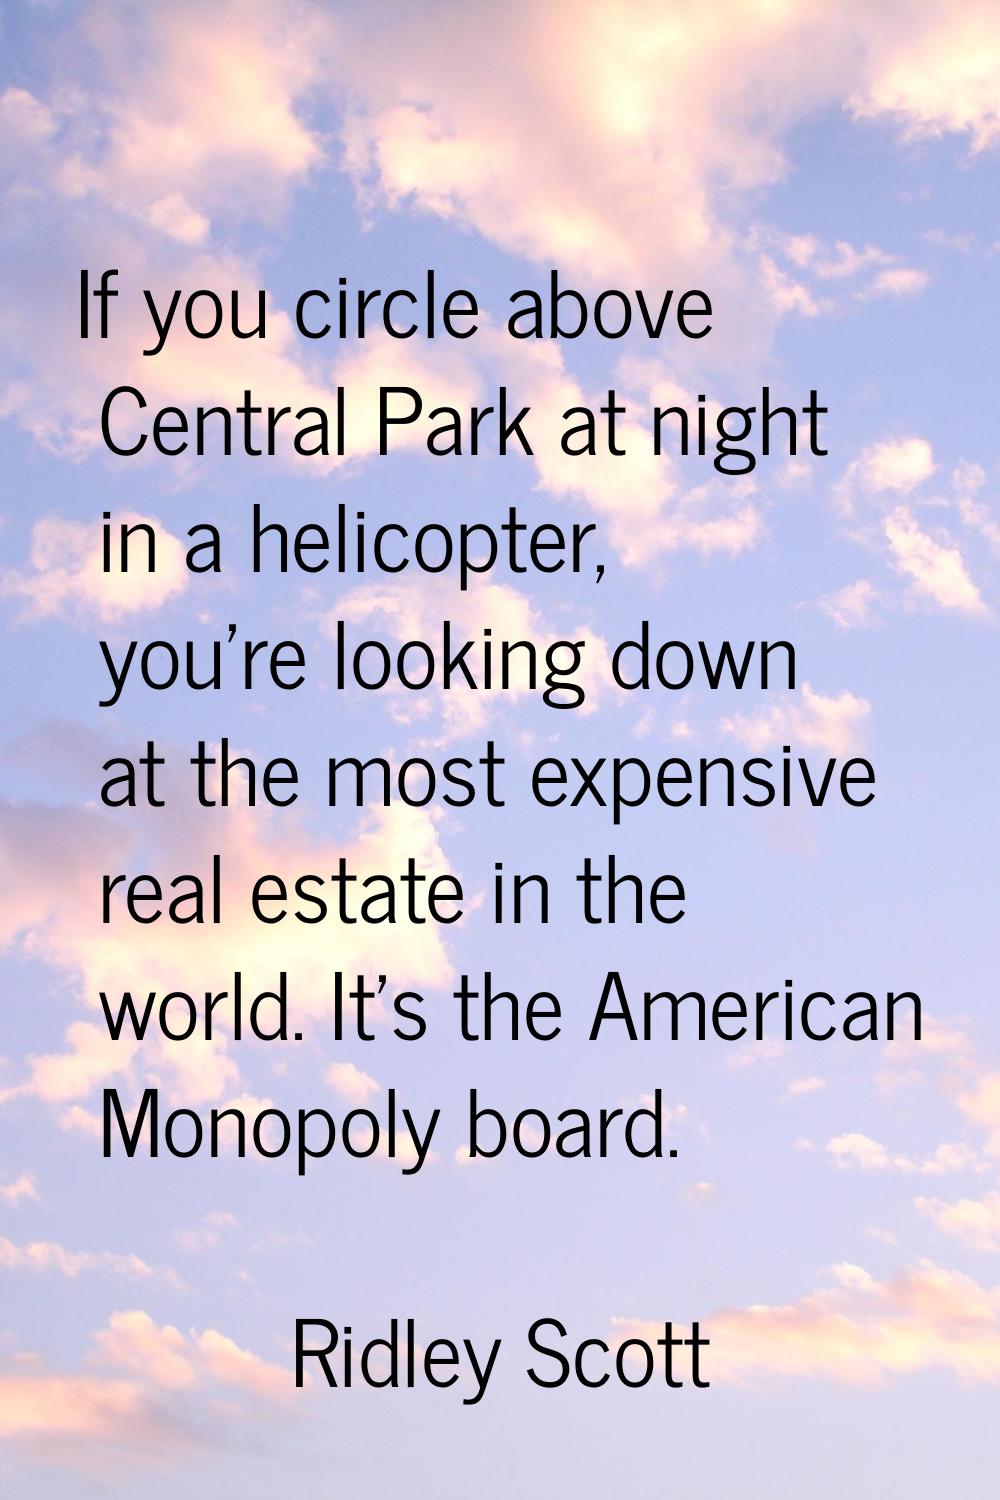 If you circle above Central Park at night in a helicopter, you're looking down at the most expensiv